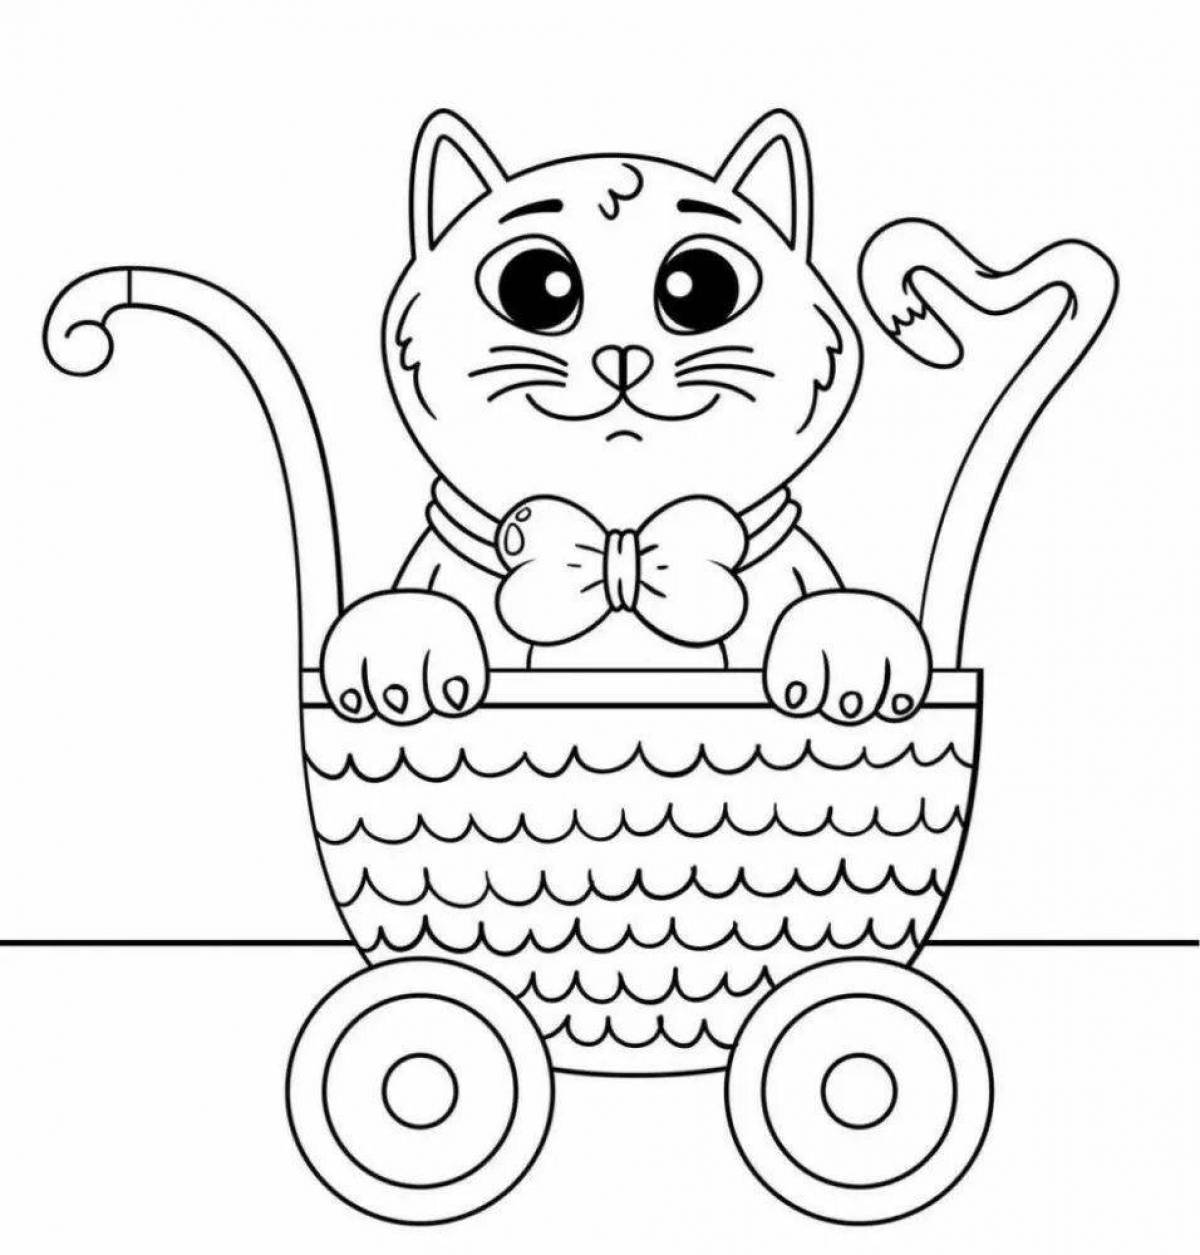 Coloring page grinning cat in a cup